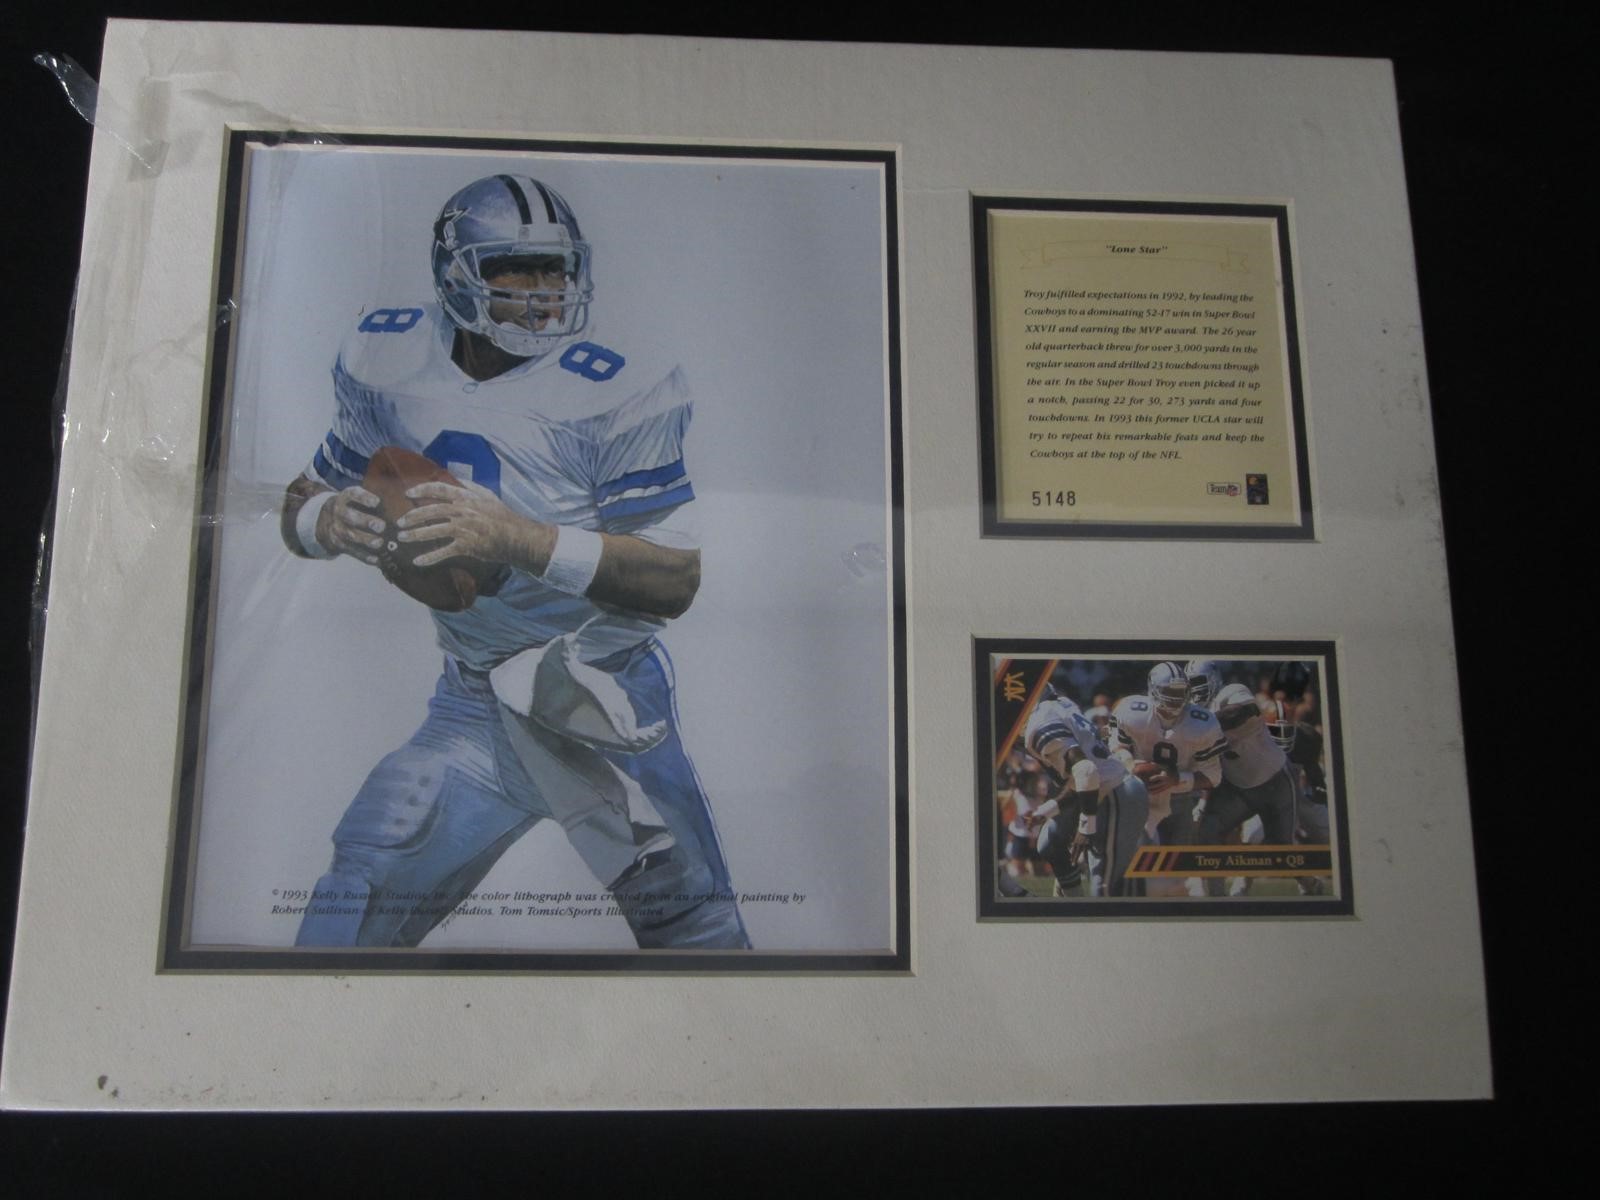 Aikman 1993 Framed Lone Star Litho with Card